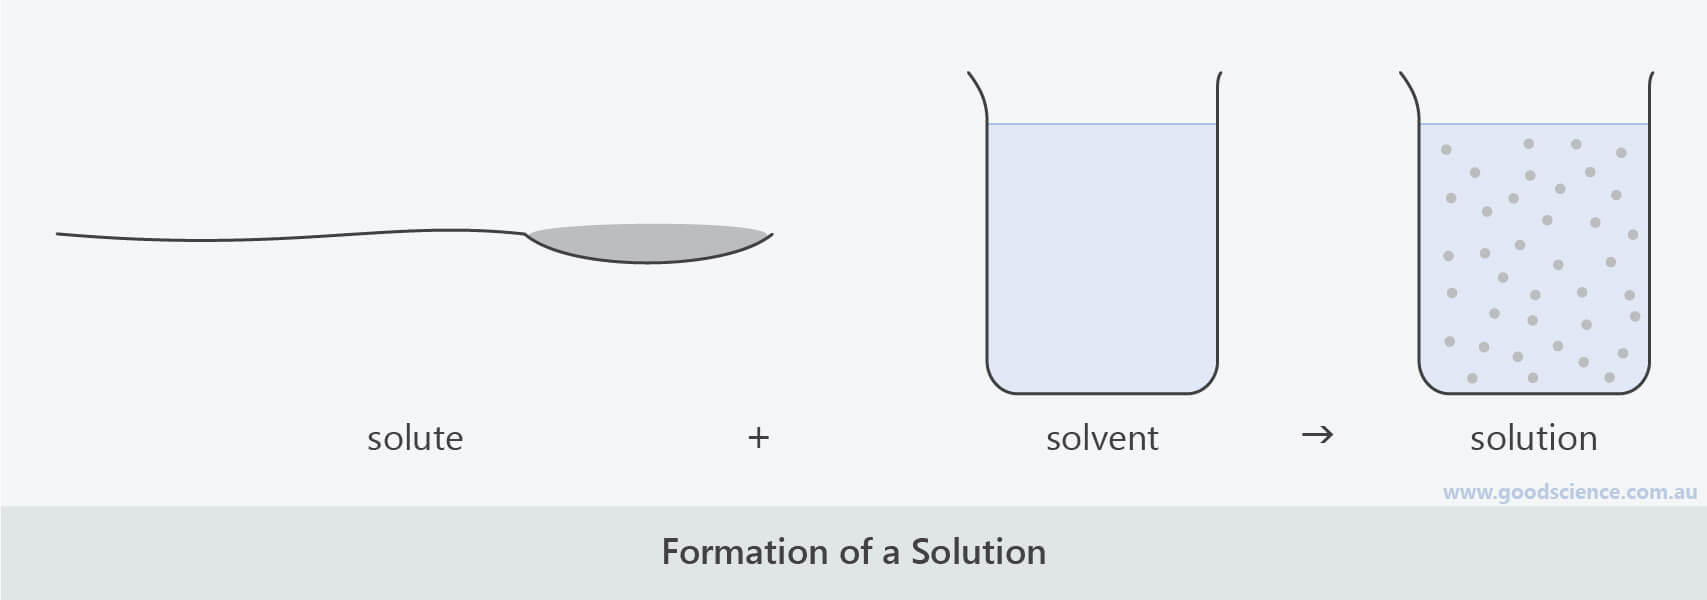 Solutions and Solubility | Good Science